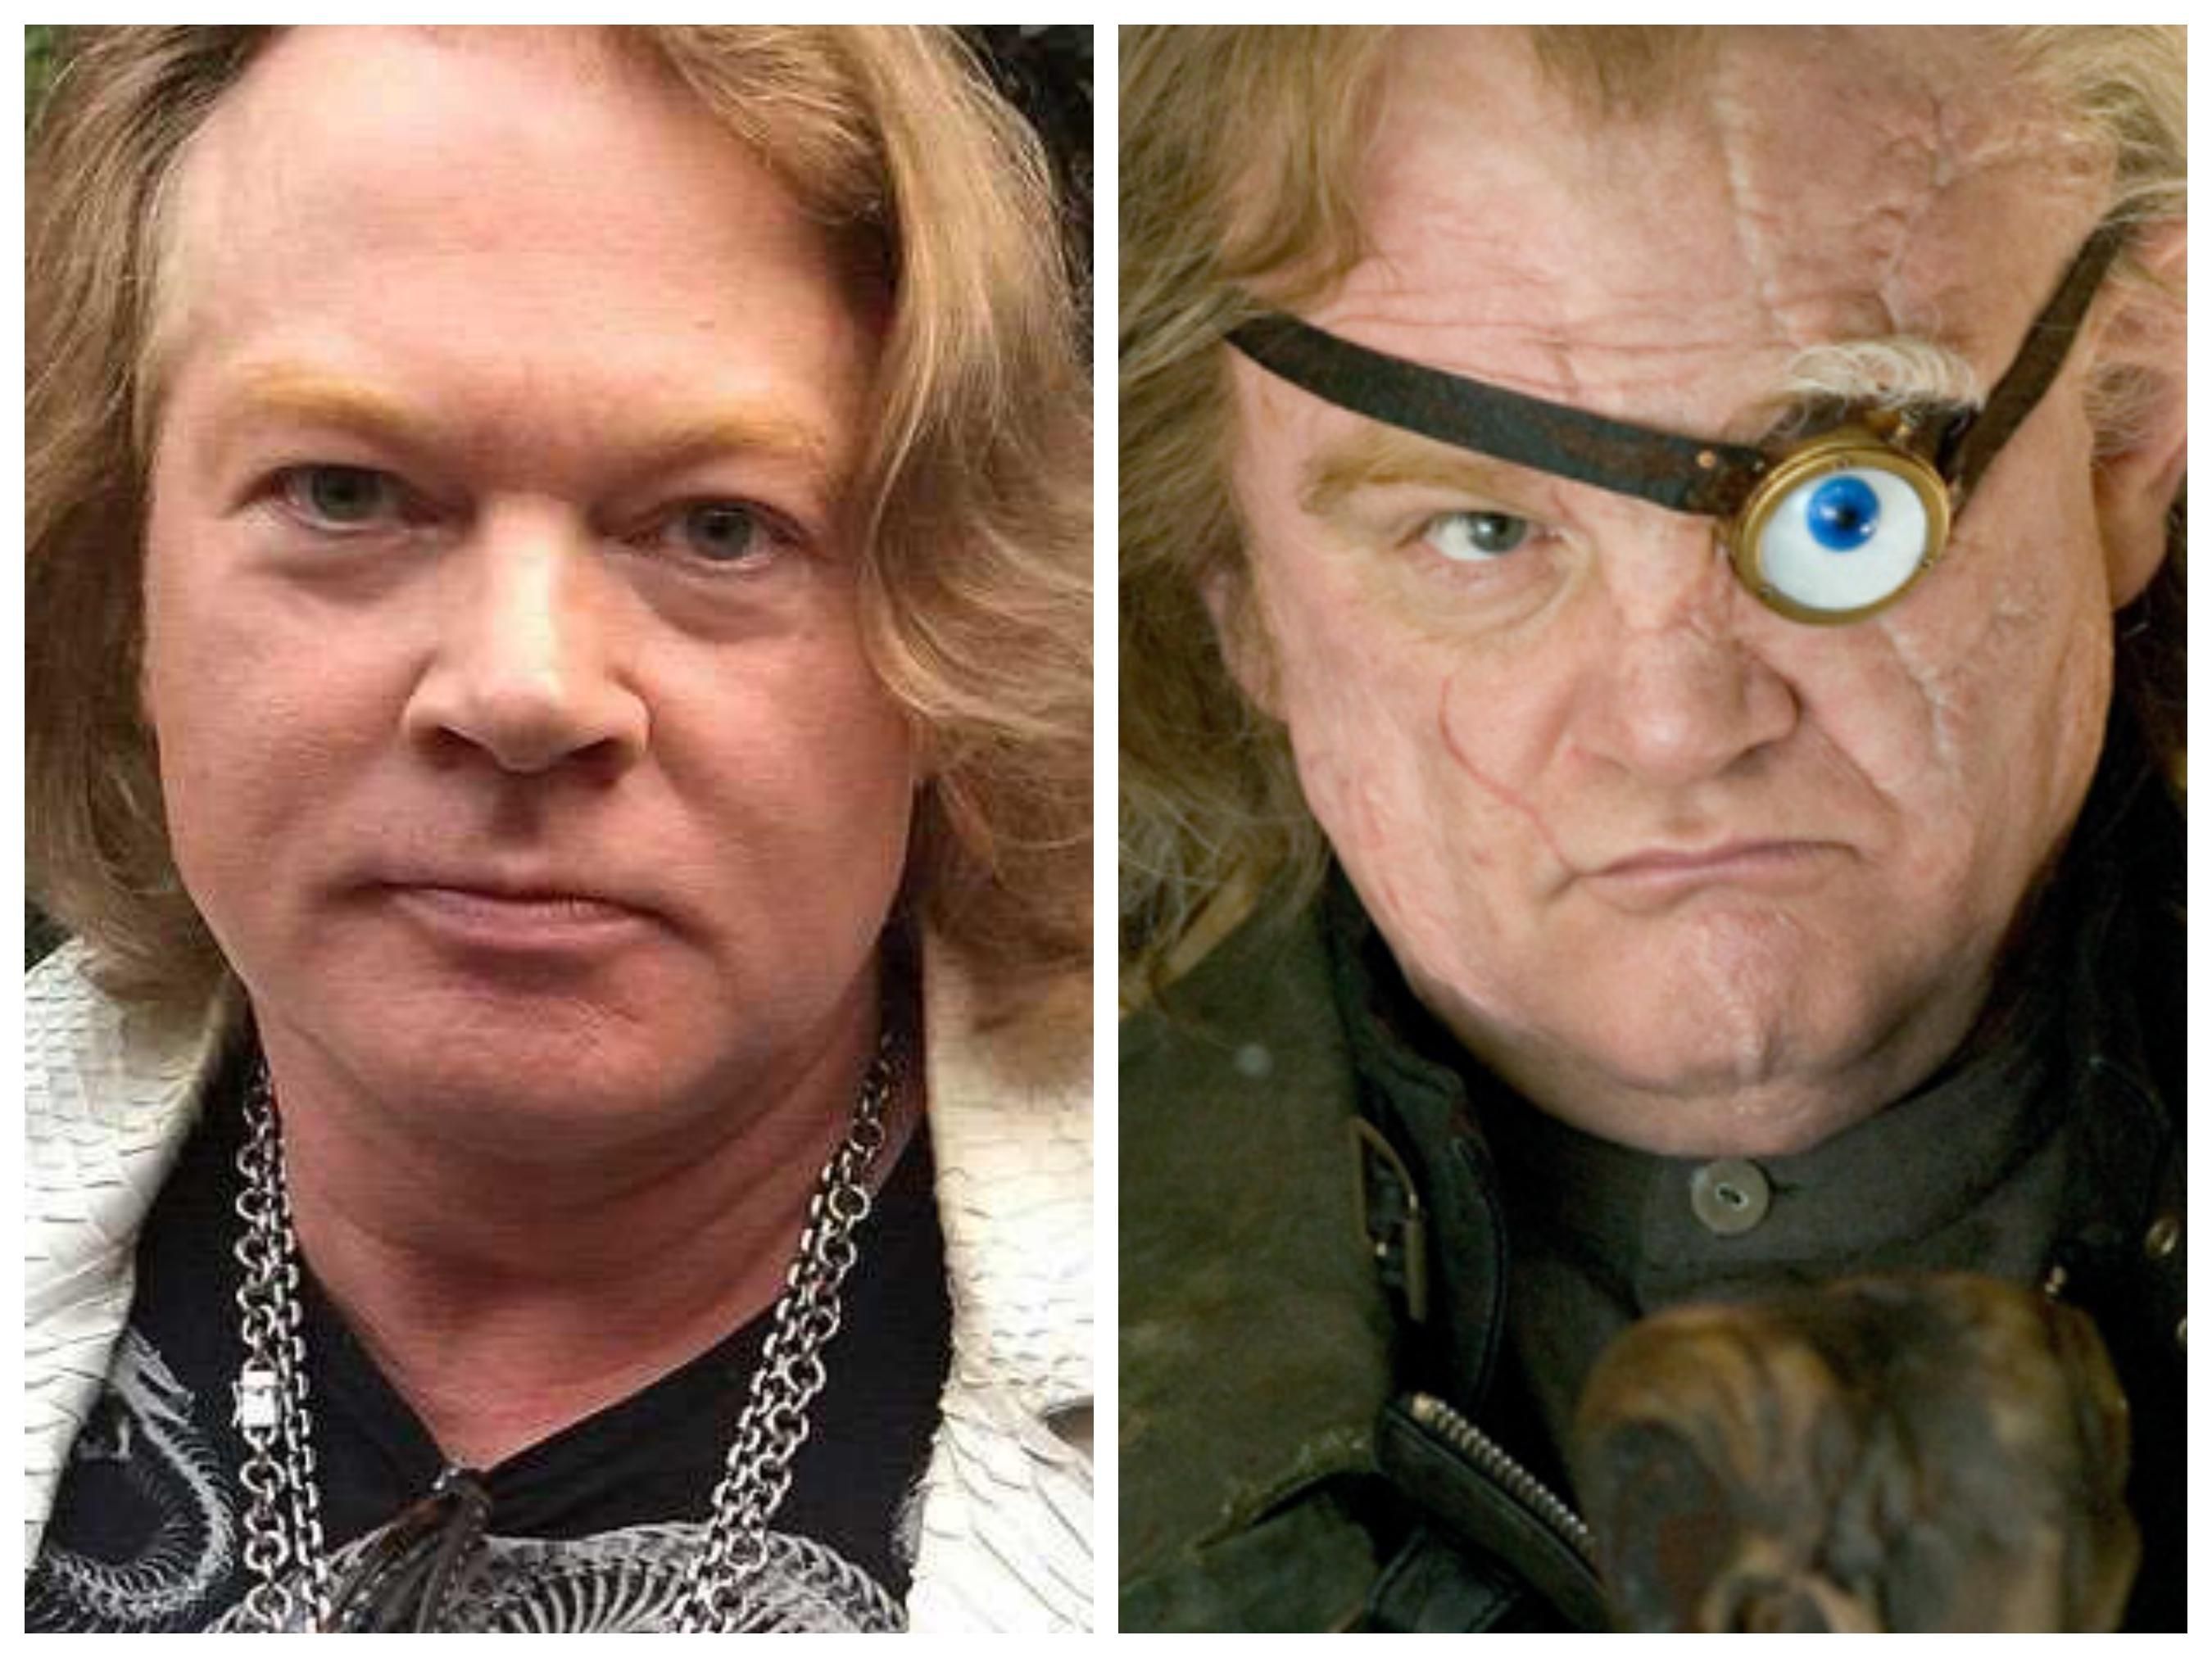 Axle Rose has become Alastor Moody!